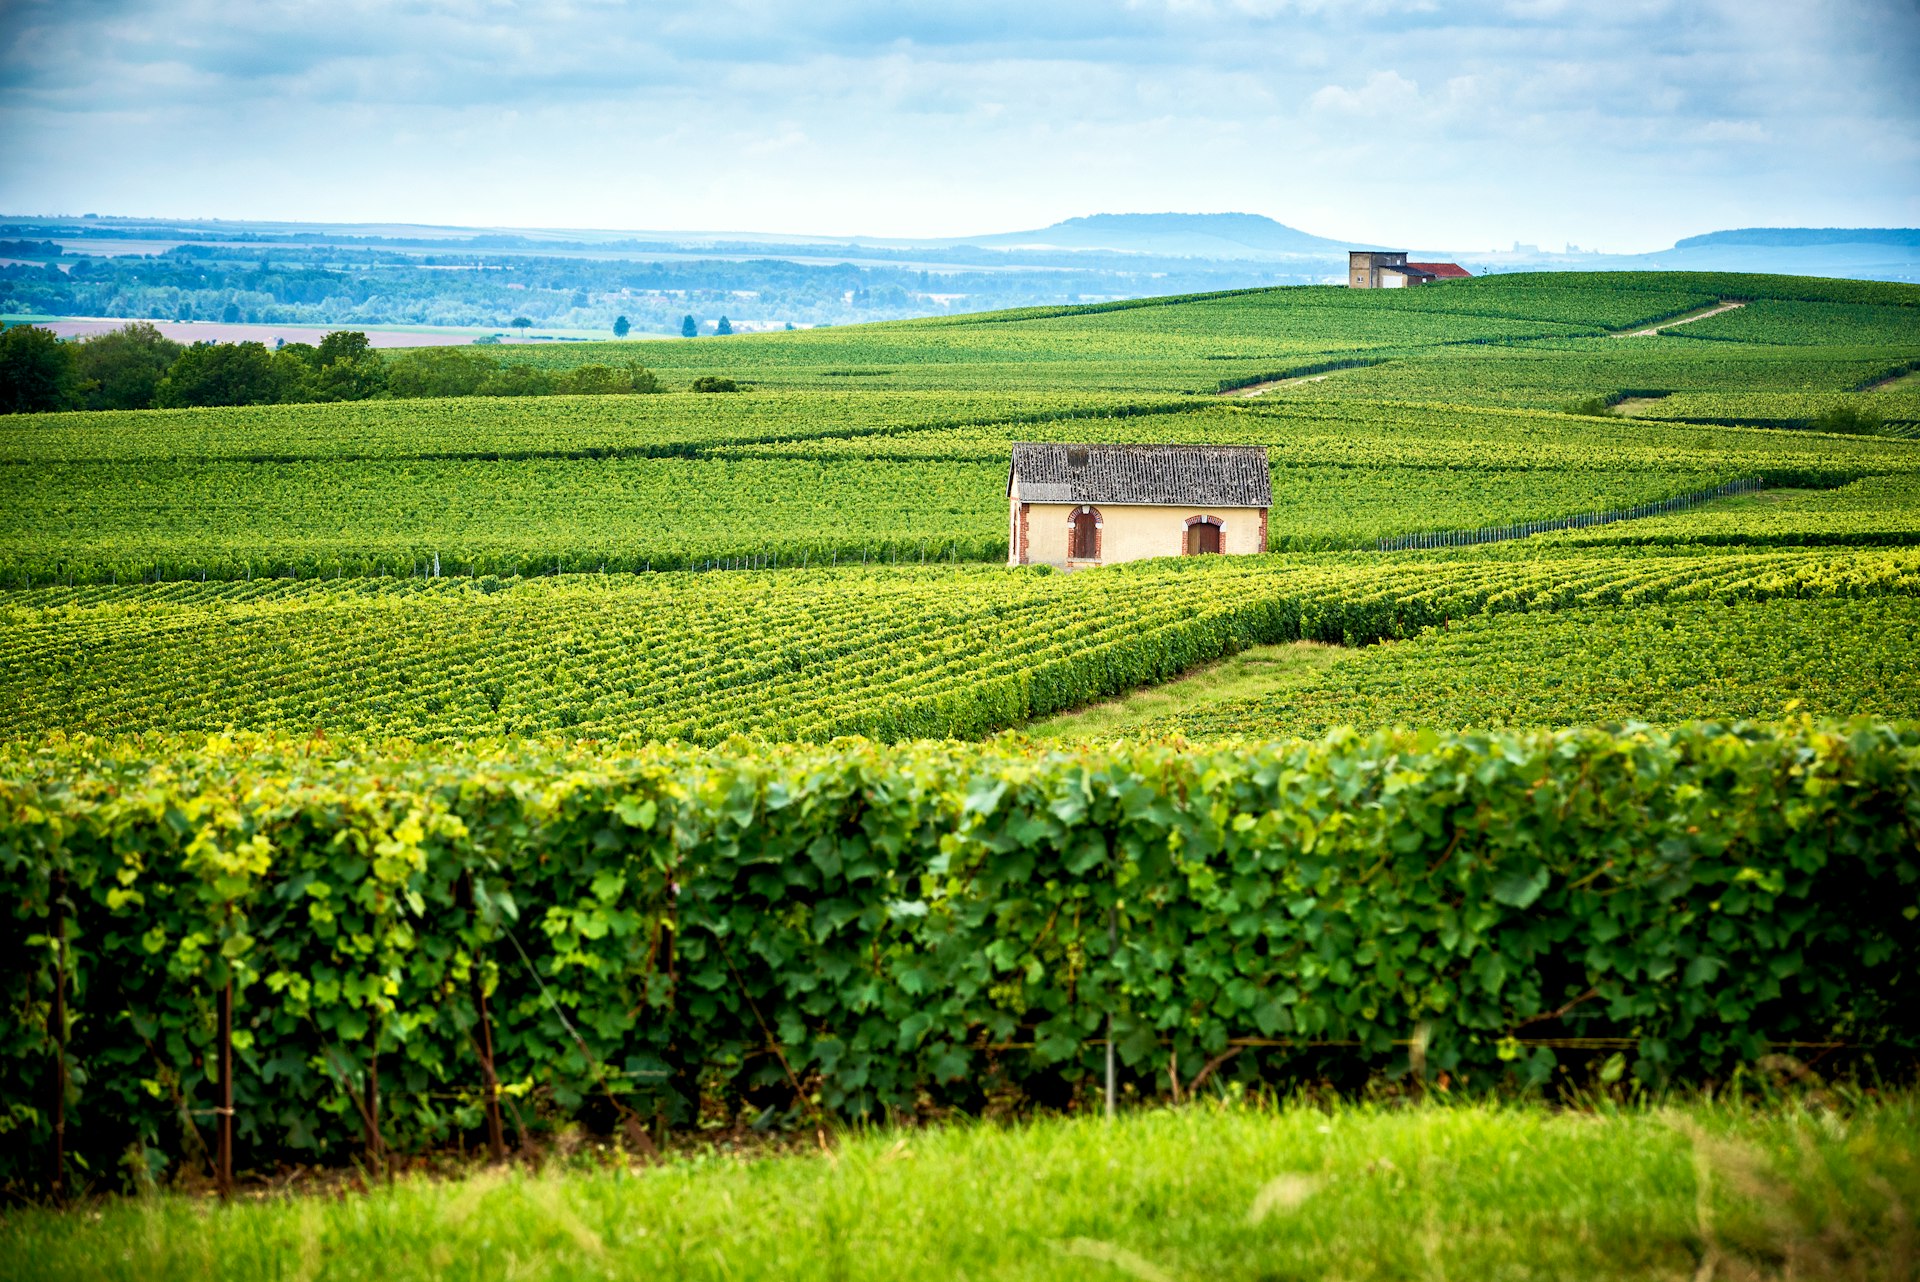 Hills covered with vineyards in France